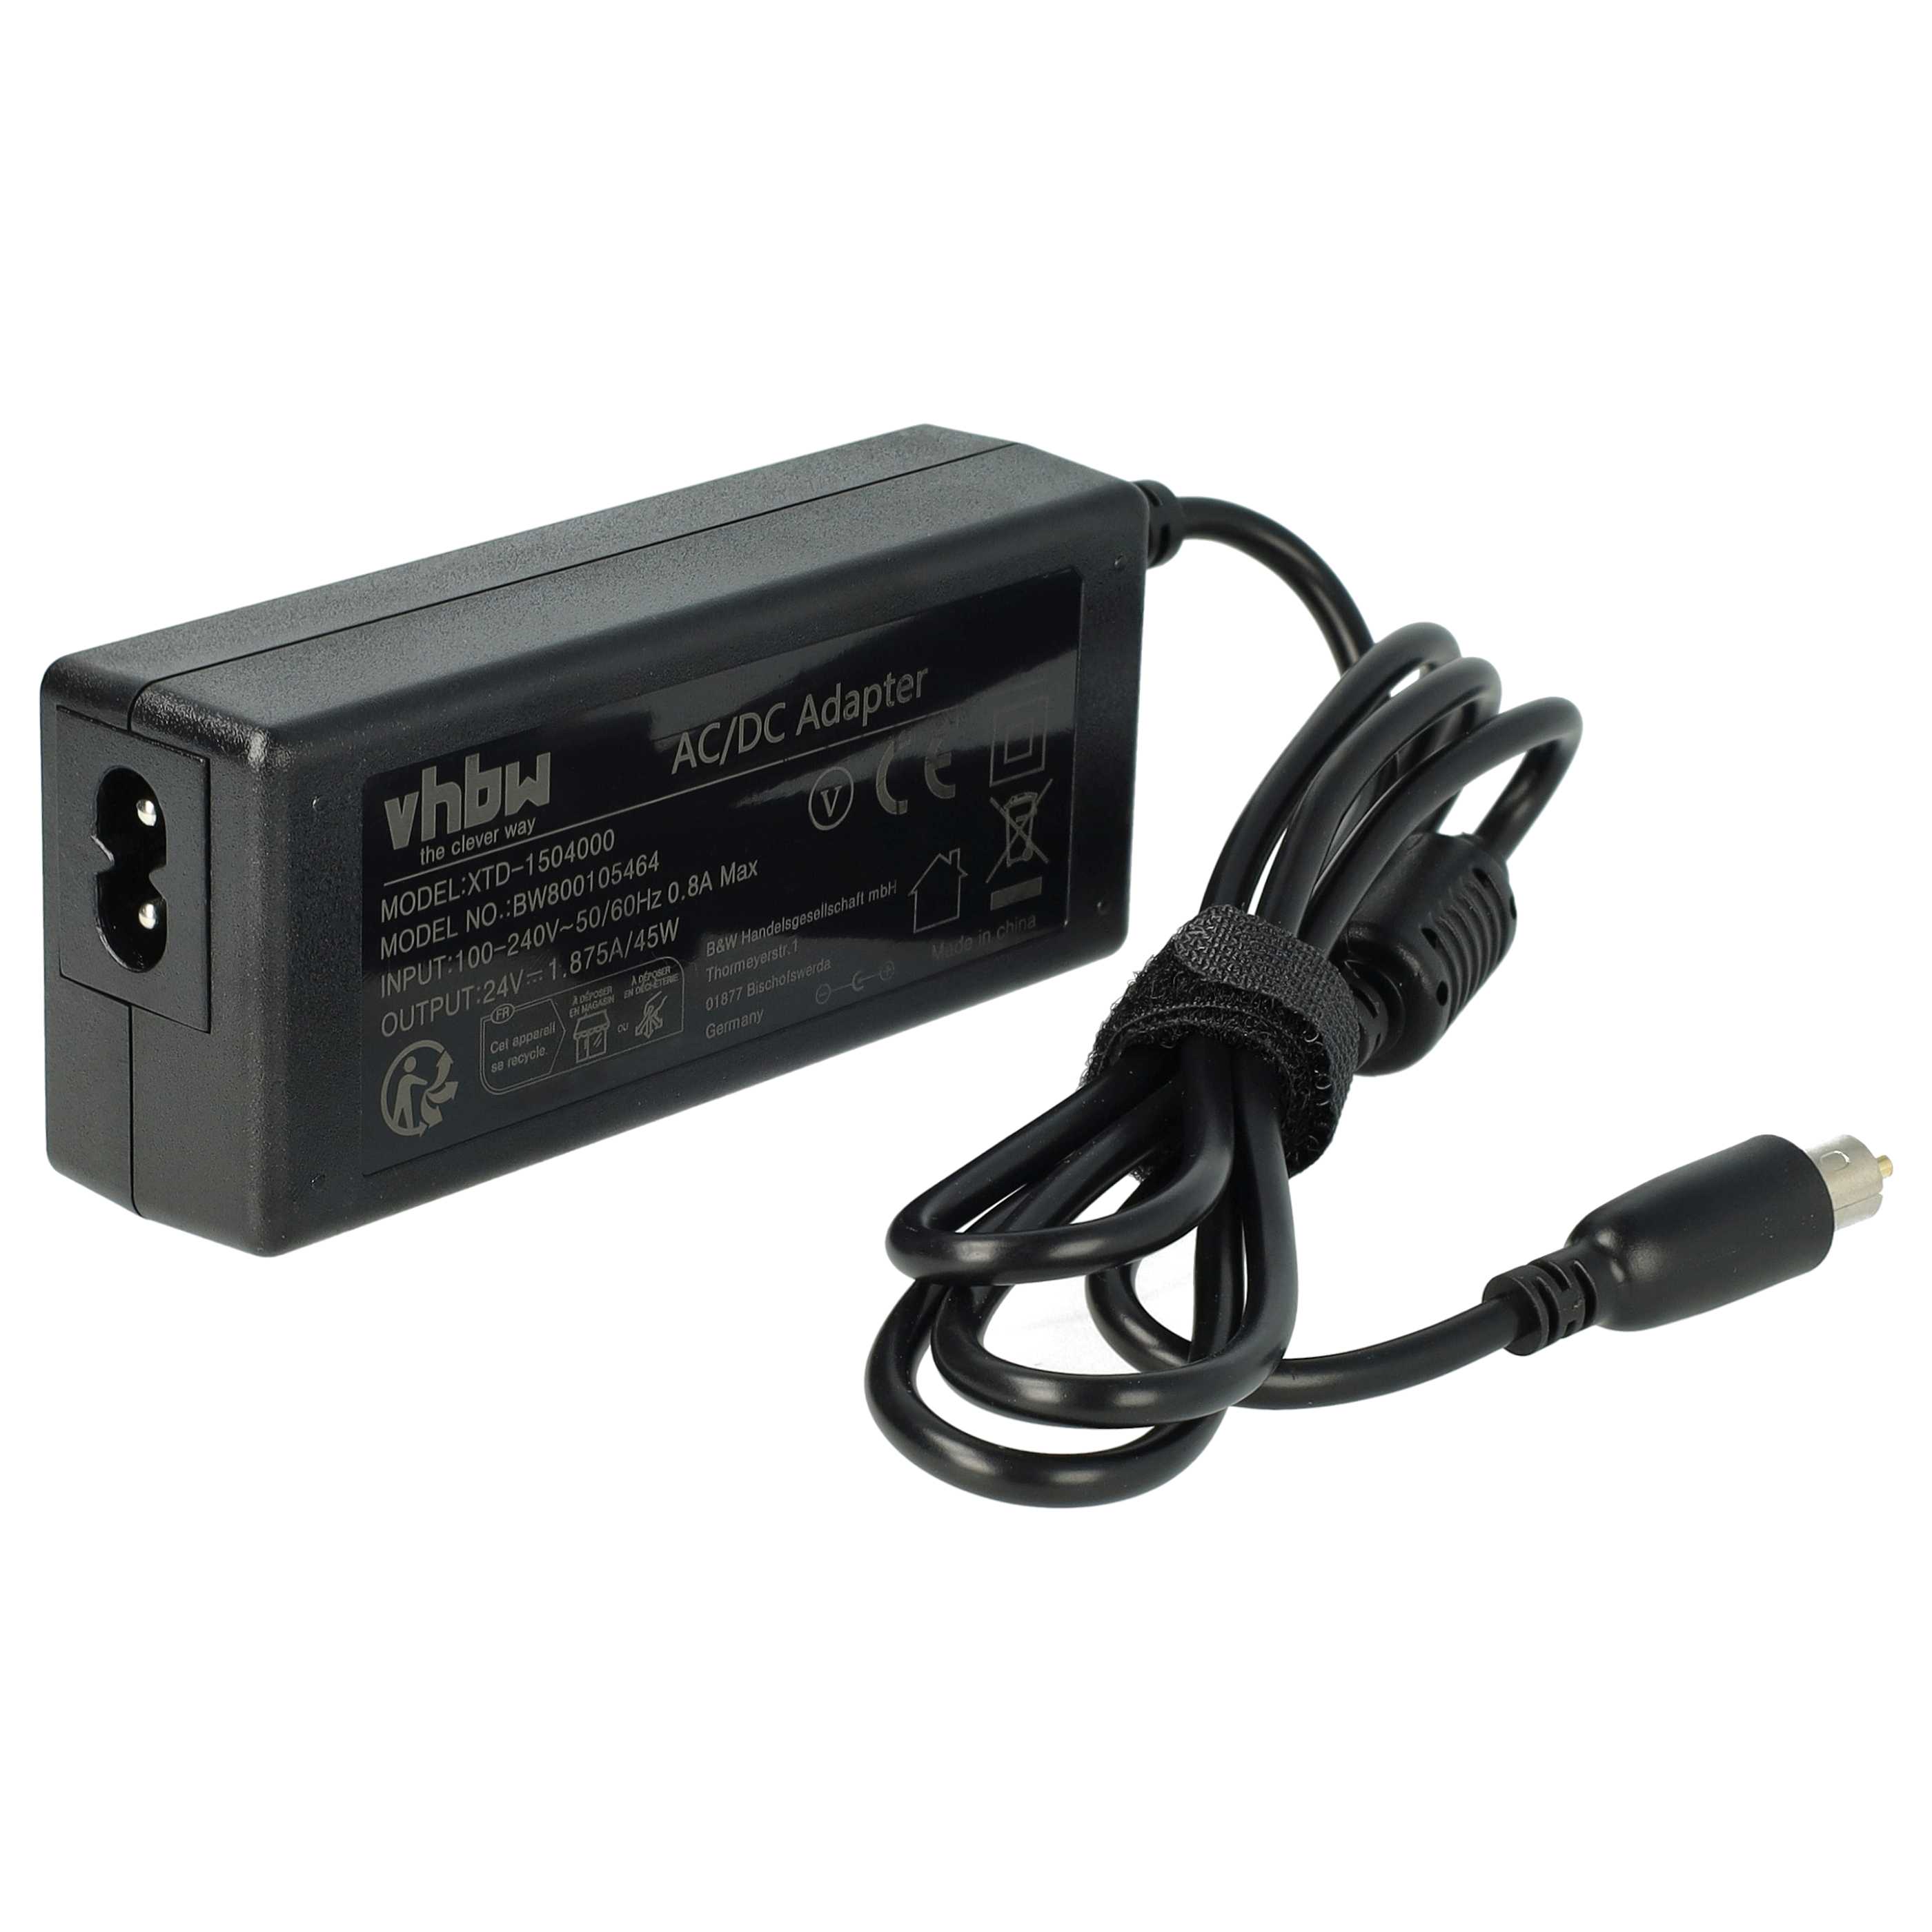 Mains Power Adapter replaces Apple M8576 for AppleNotebook, 45 W